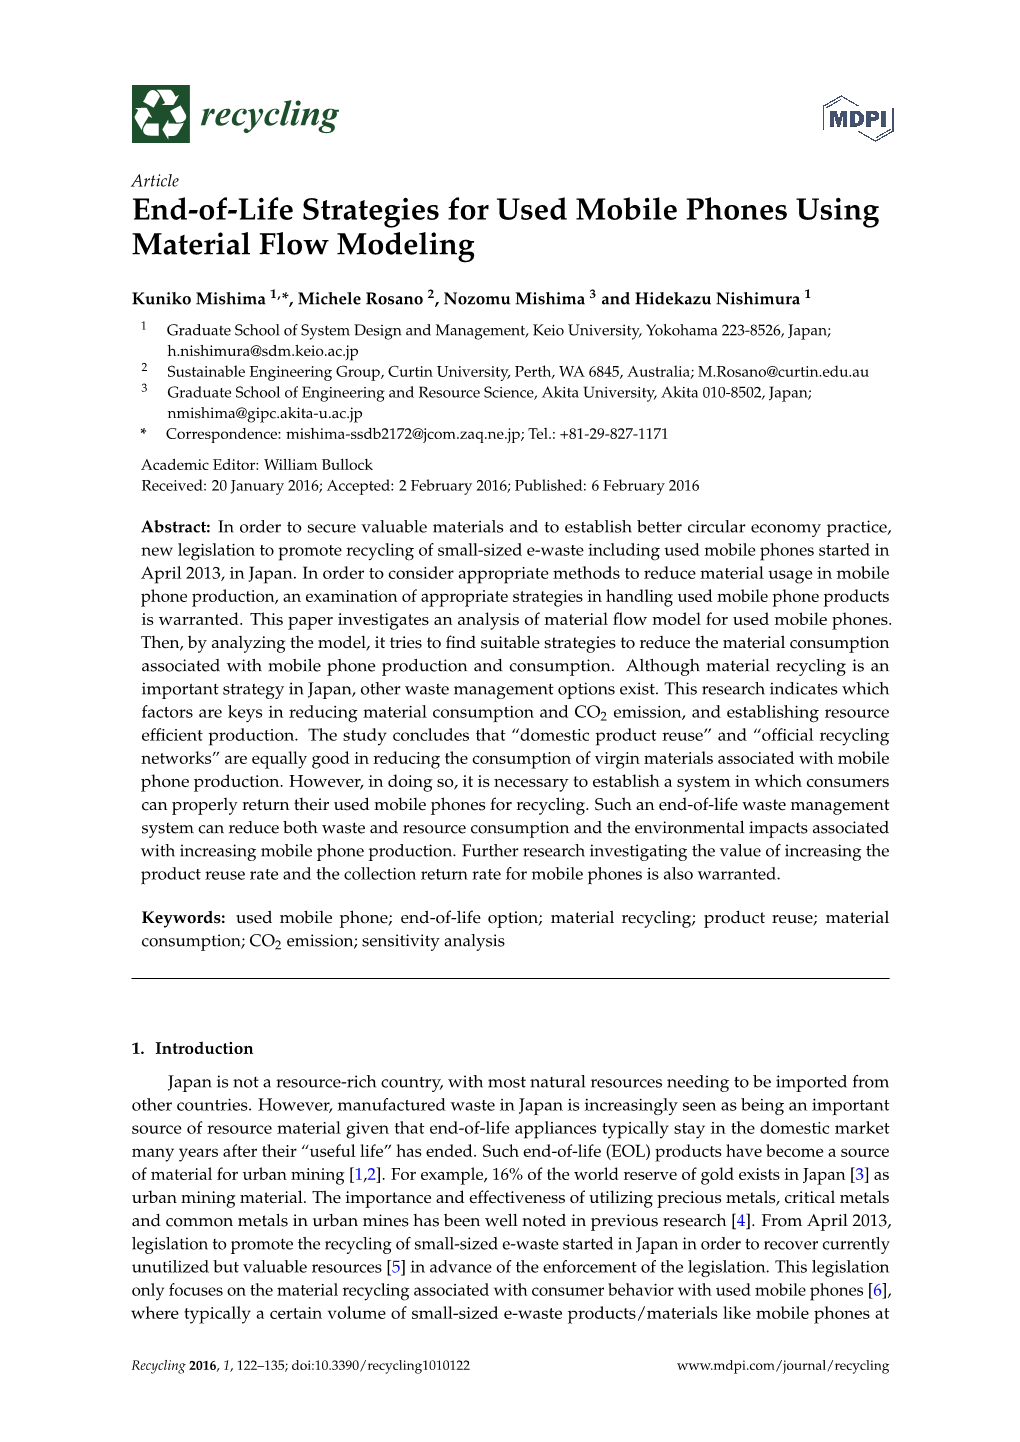 End-Of-Life Strategies for Used Mobile Phones Using Material Flow Modeling